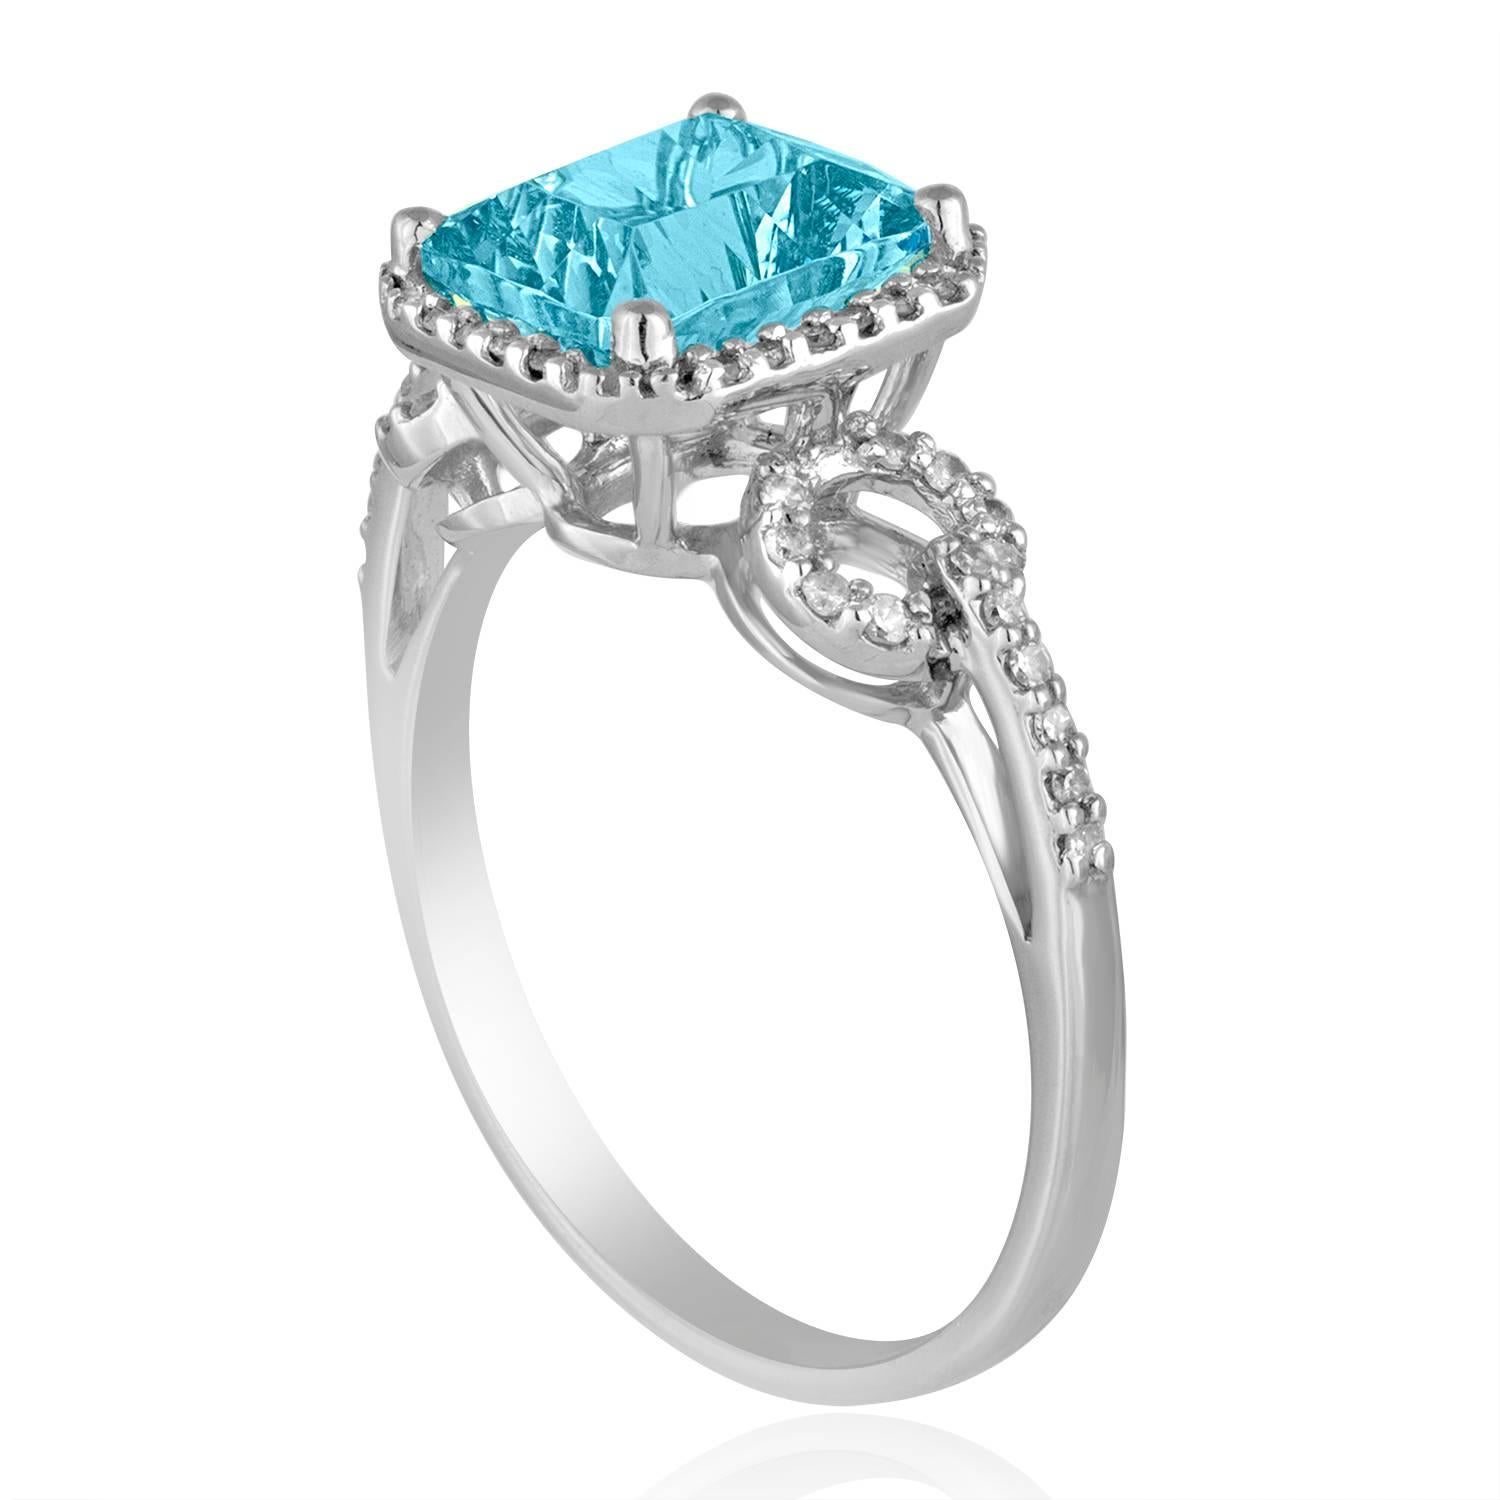 Stunning Blue Topaz Ring
The ring is 14K White Gold
There are 0.18 Carats In Diamonds H/I I1
The Blue Topaz is a Millennium Radiant Cut 2.39 Carats
The top measures 6/16